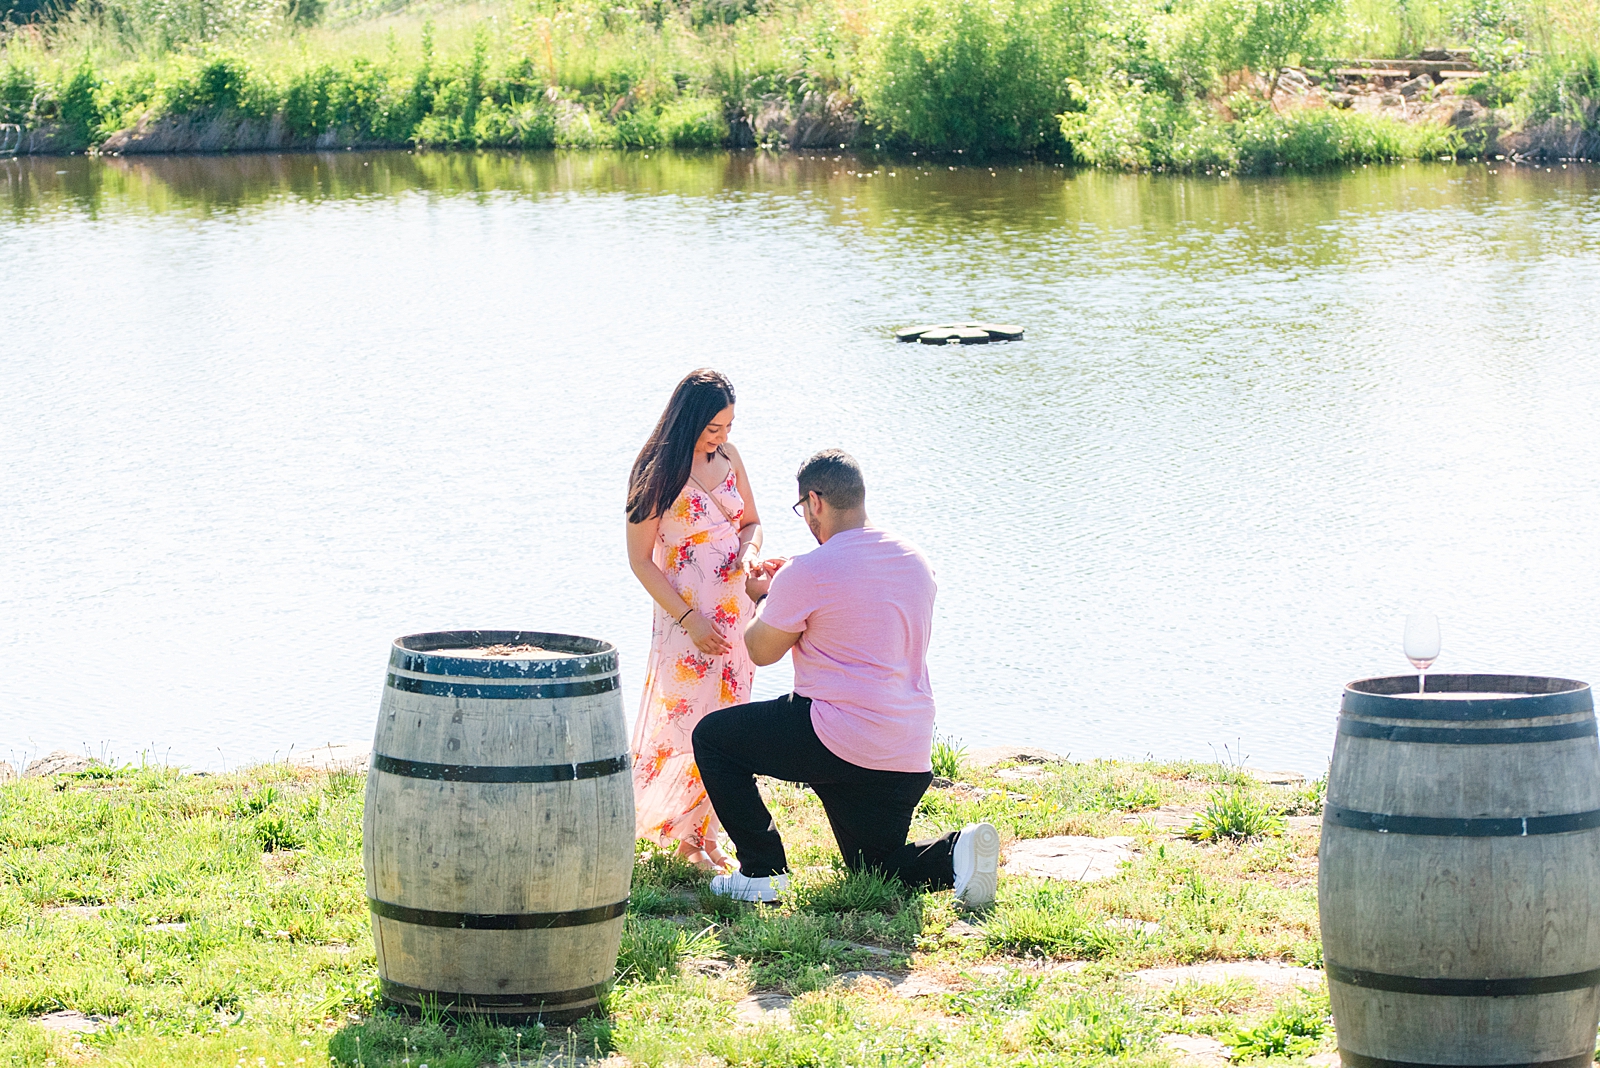 Stone Tower Winery Proposal Photographer StoneTowerWineryProposalPhotograph Stone Tower Winery Wedding Stone Tower Winery Wedding Photographer Stone Tower Winery Wedding Photography by Manali Photography DC Wedding Photographer